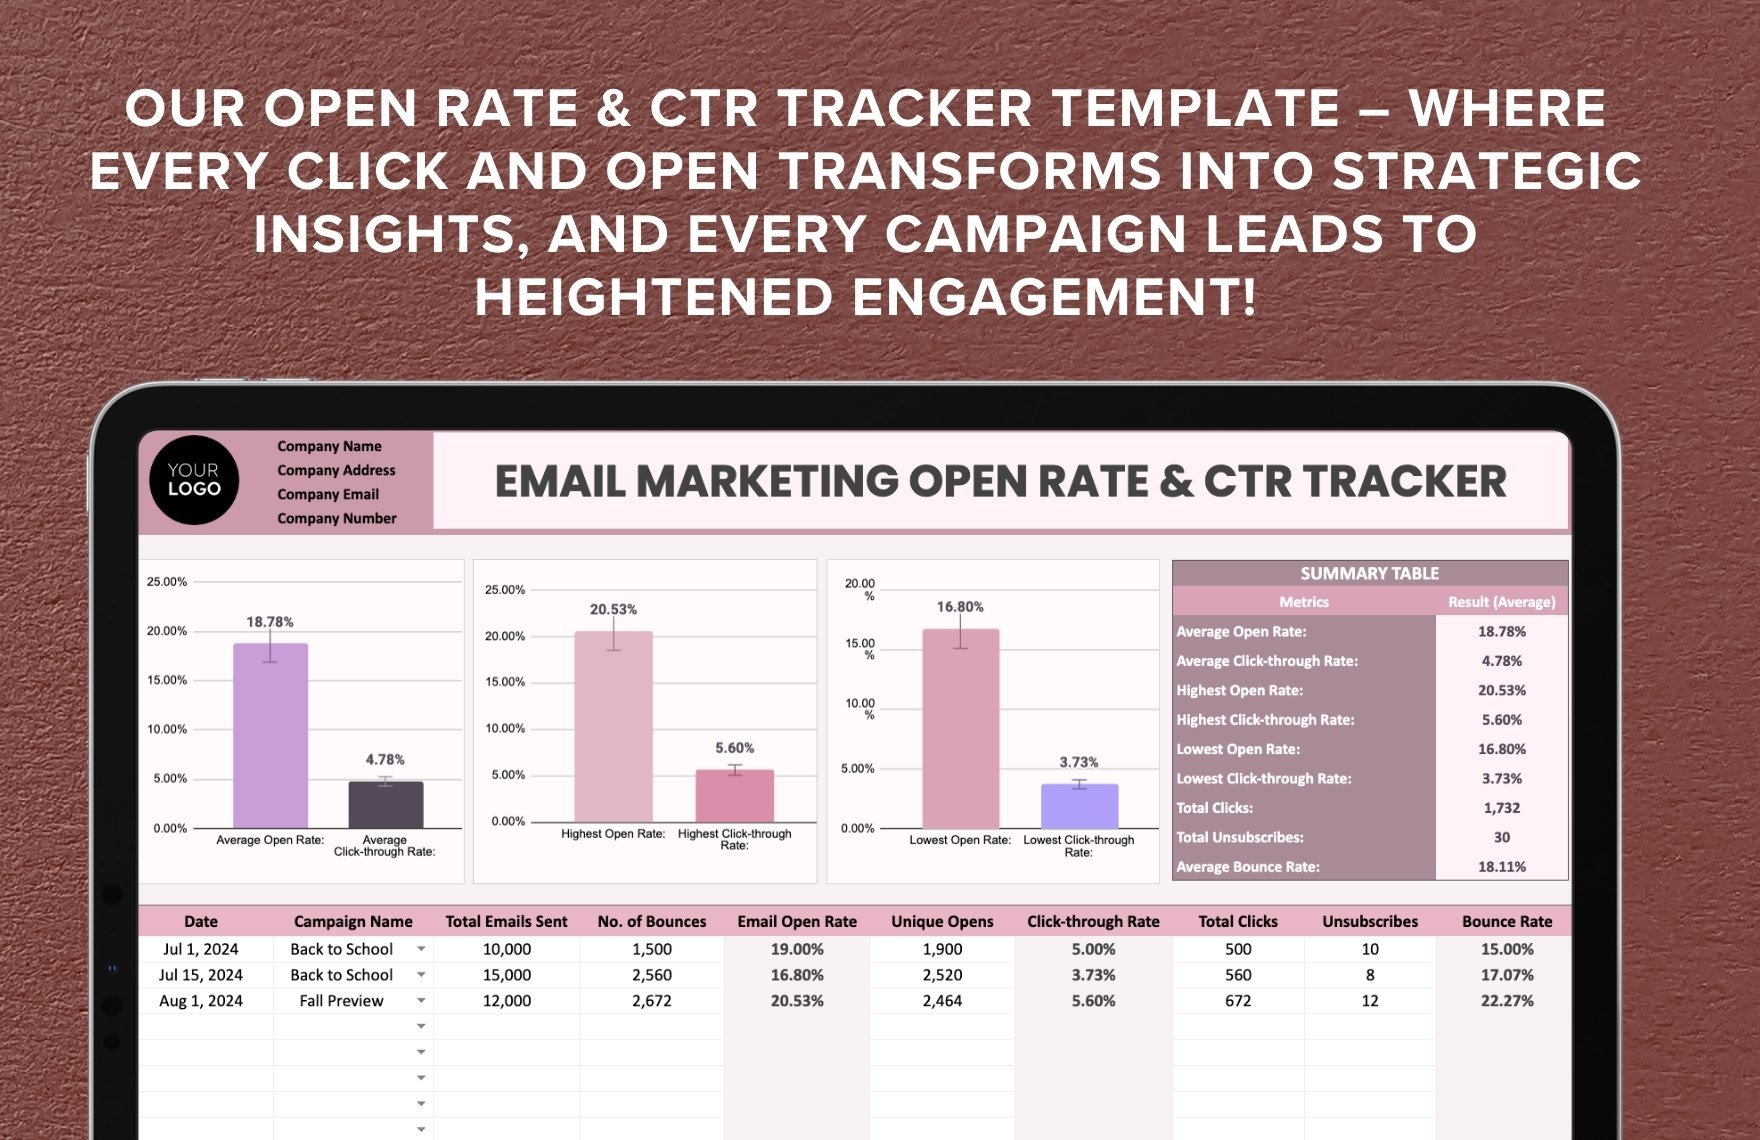 Email Marketing Open Rate & CTR Tracker Template